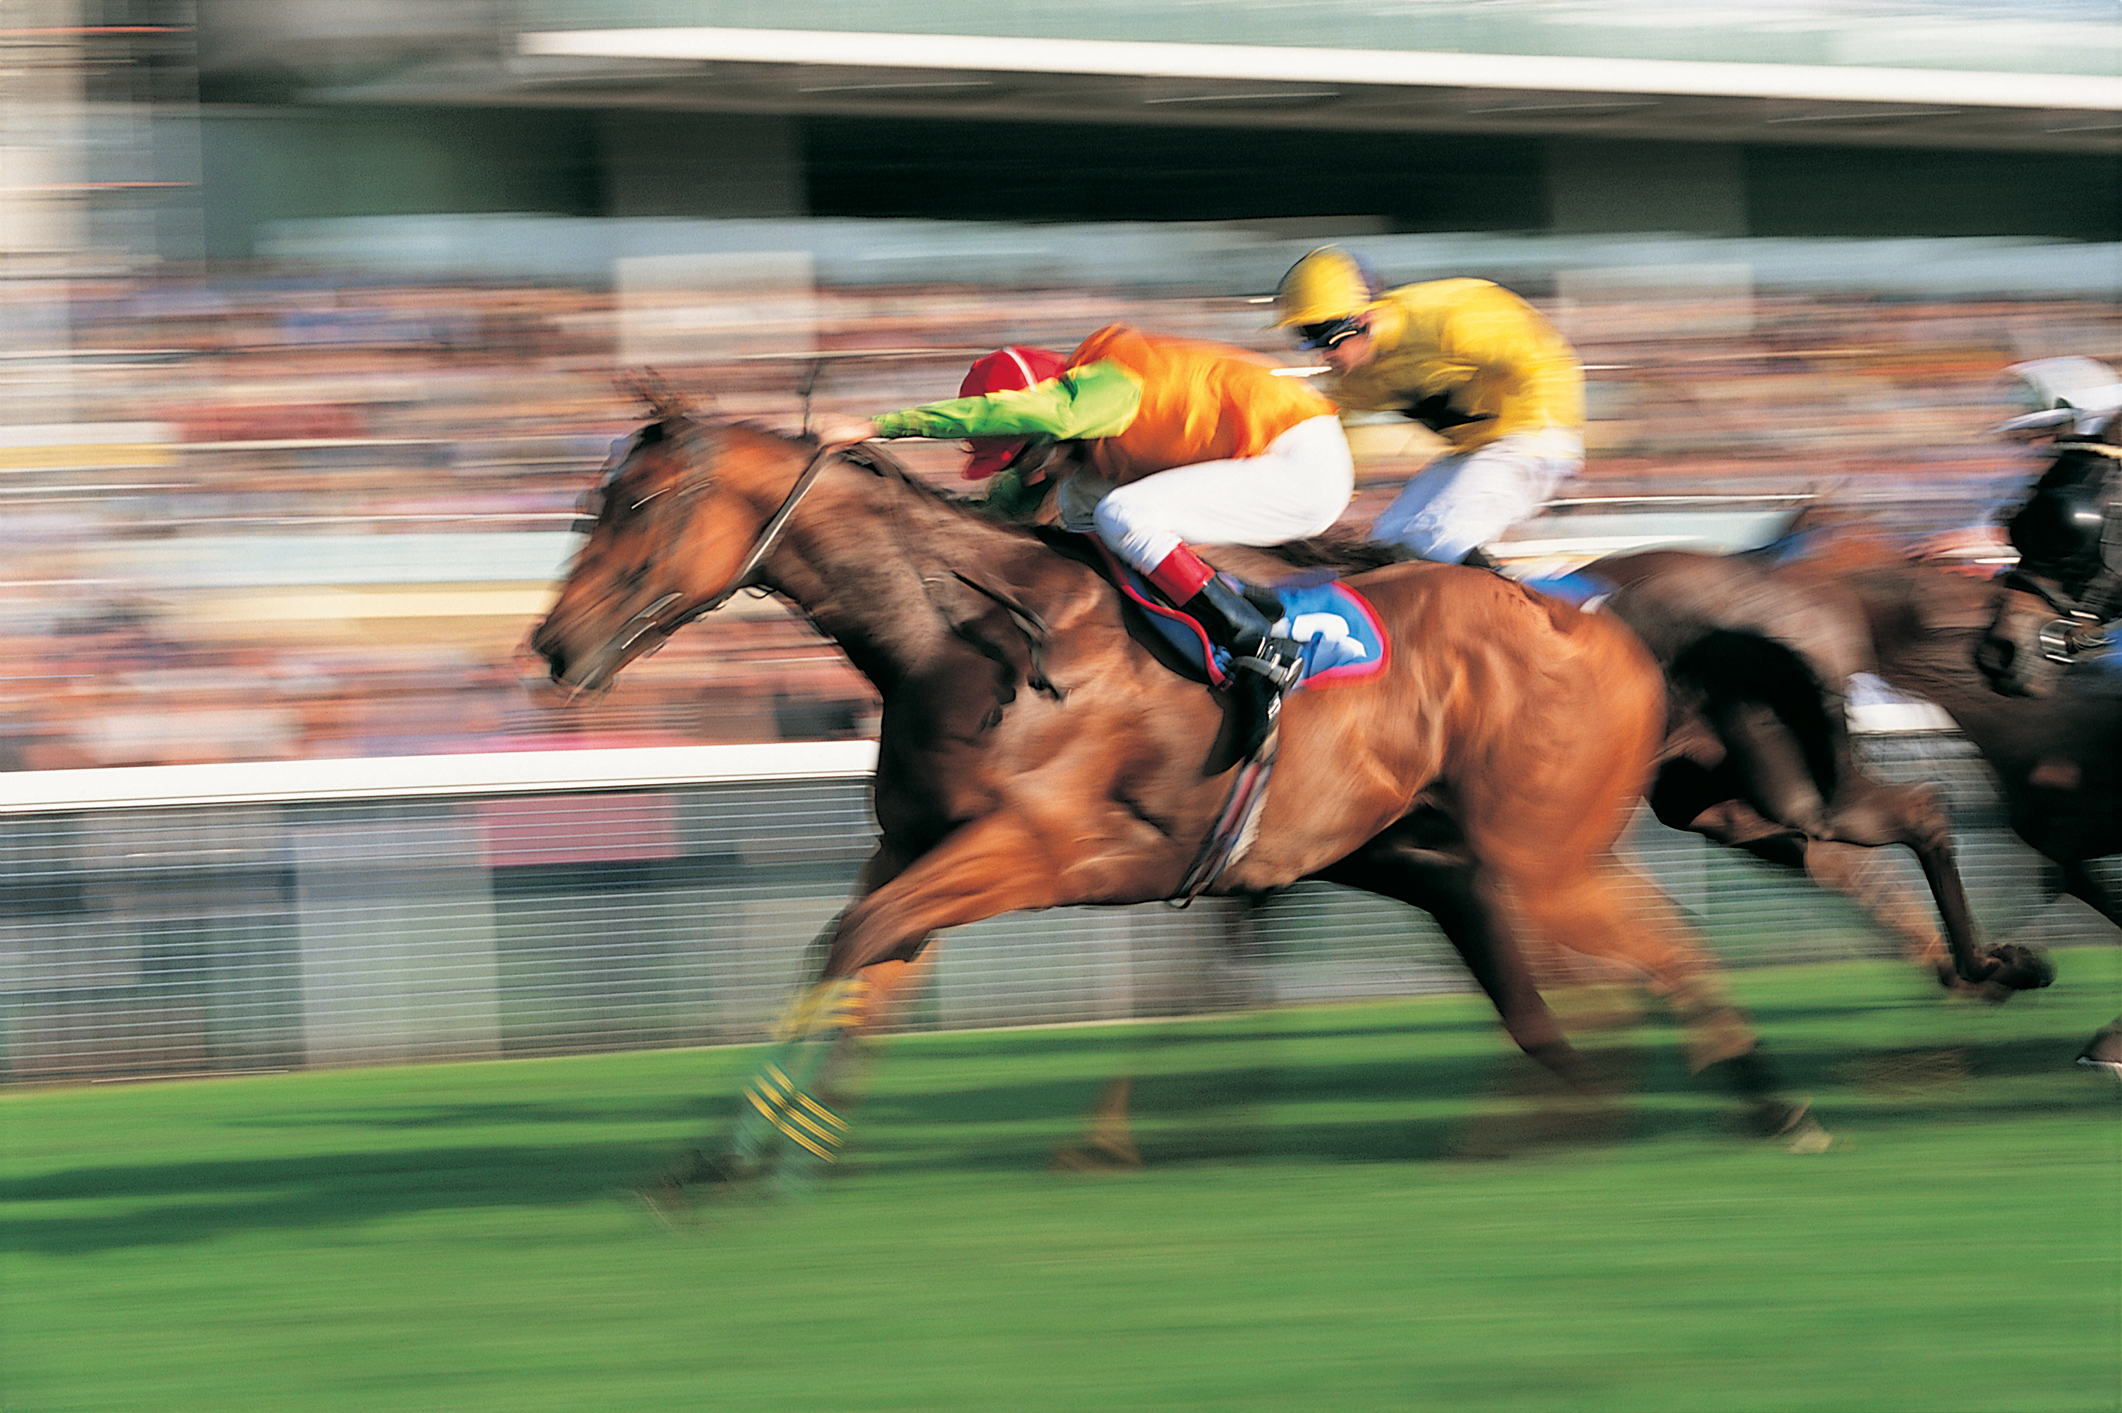 Horses racing in a blur